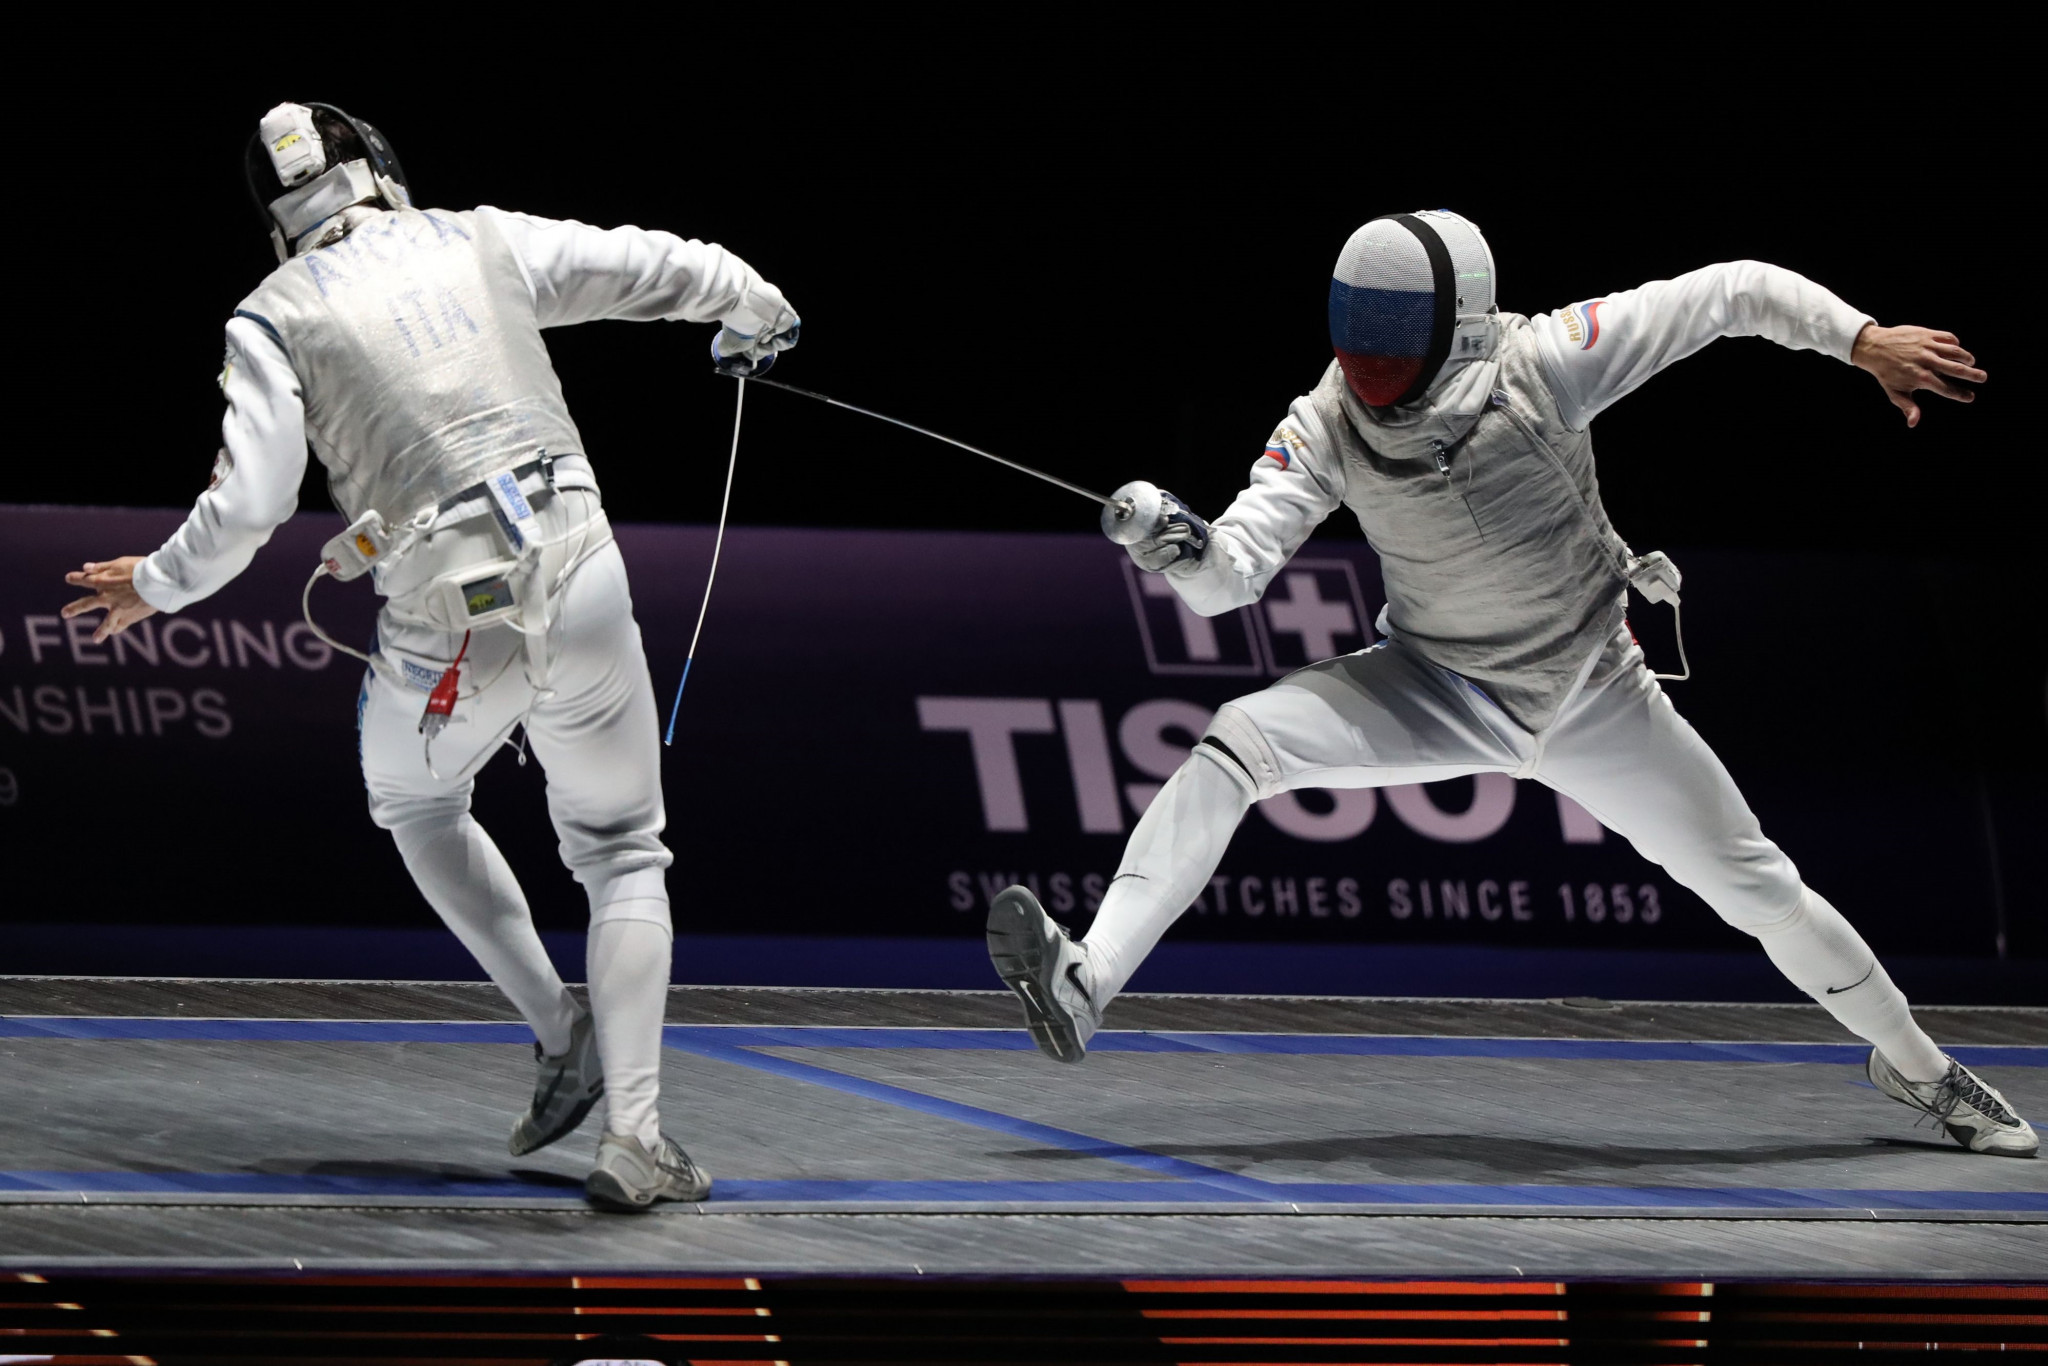 Russian fencers are banned from international competition due to the war in Ukraine, but the topic is up for debate at the FIE Congress ©Getty Images